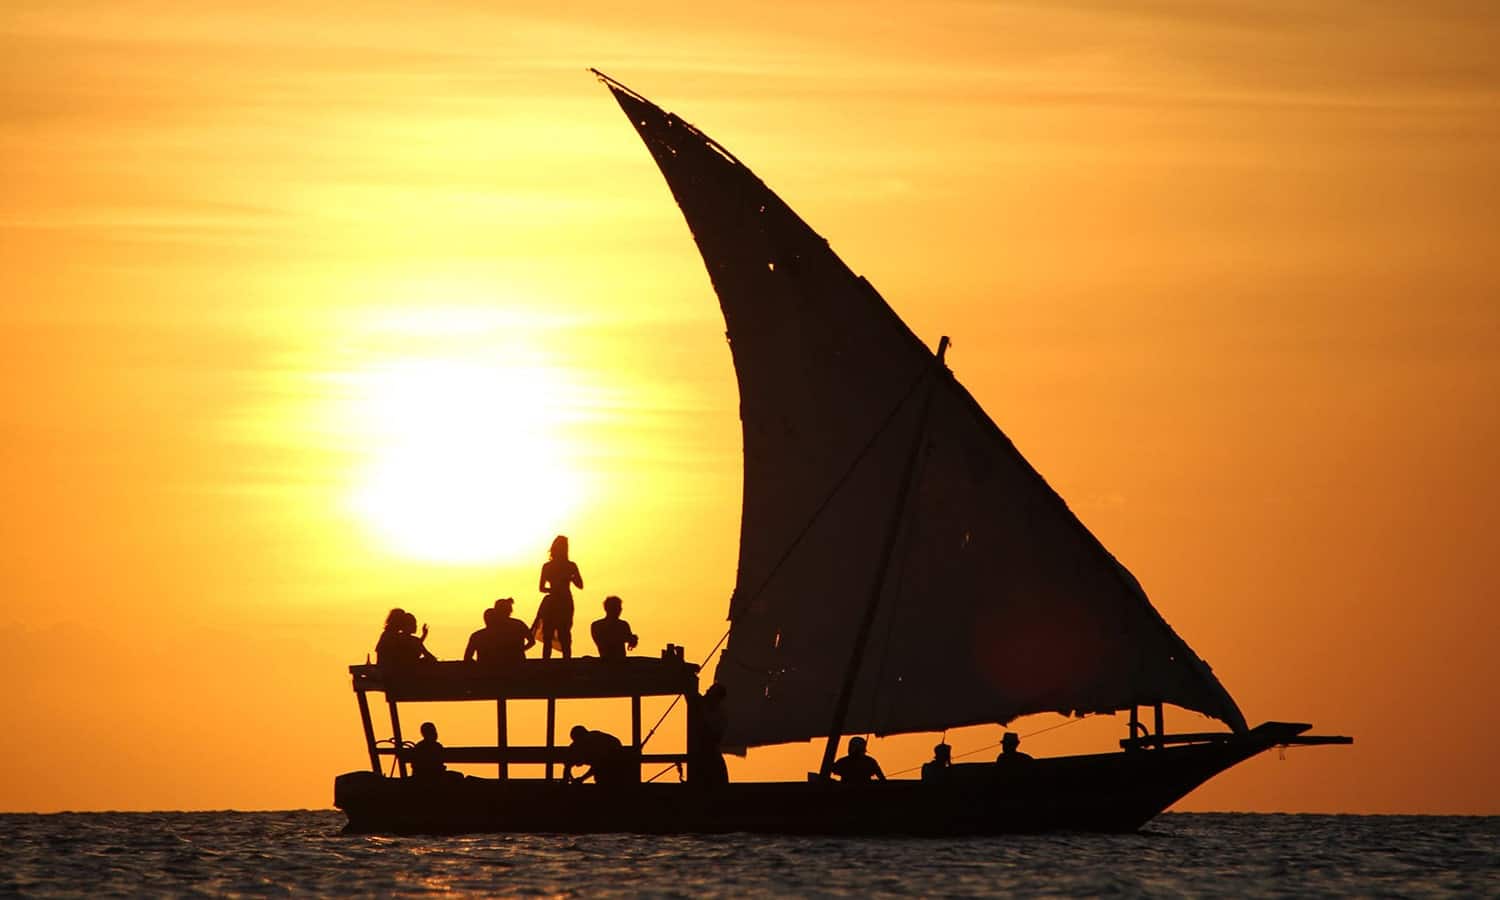 Dhow excursions